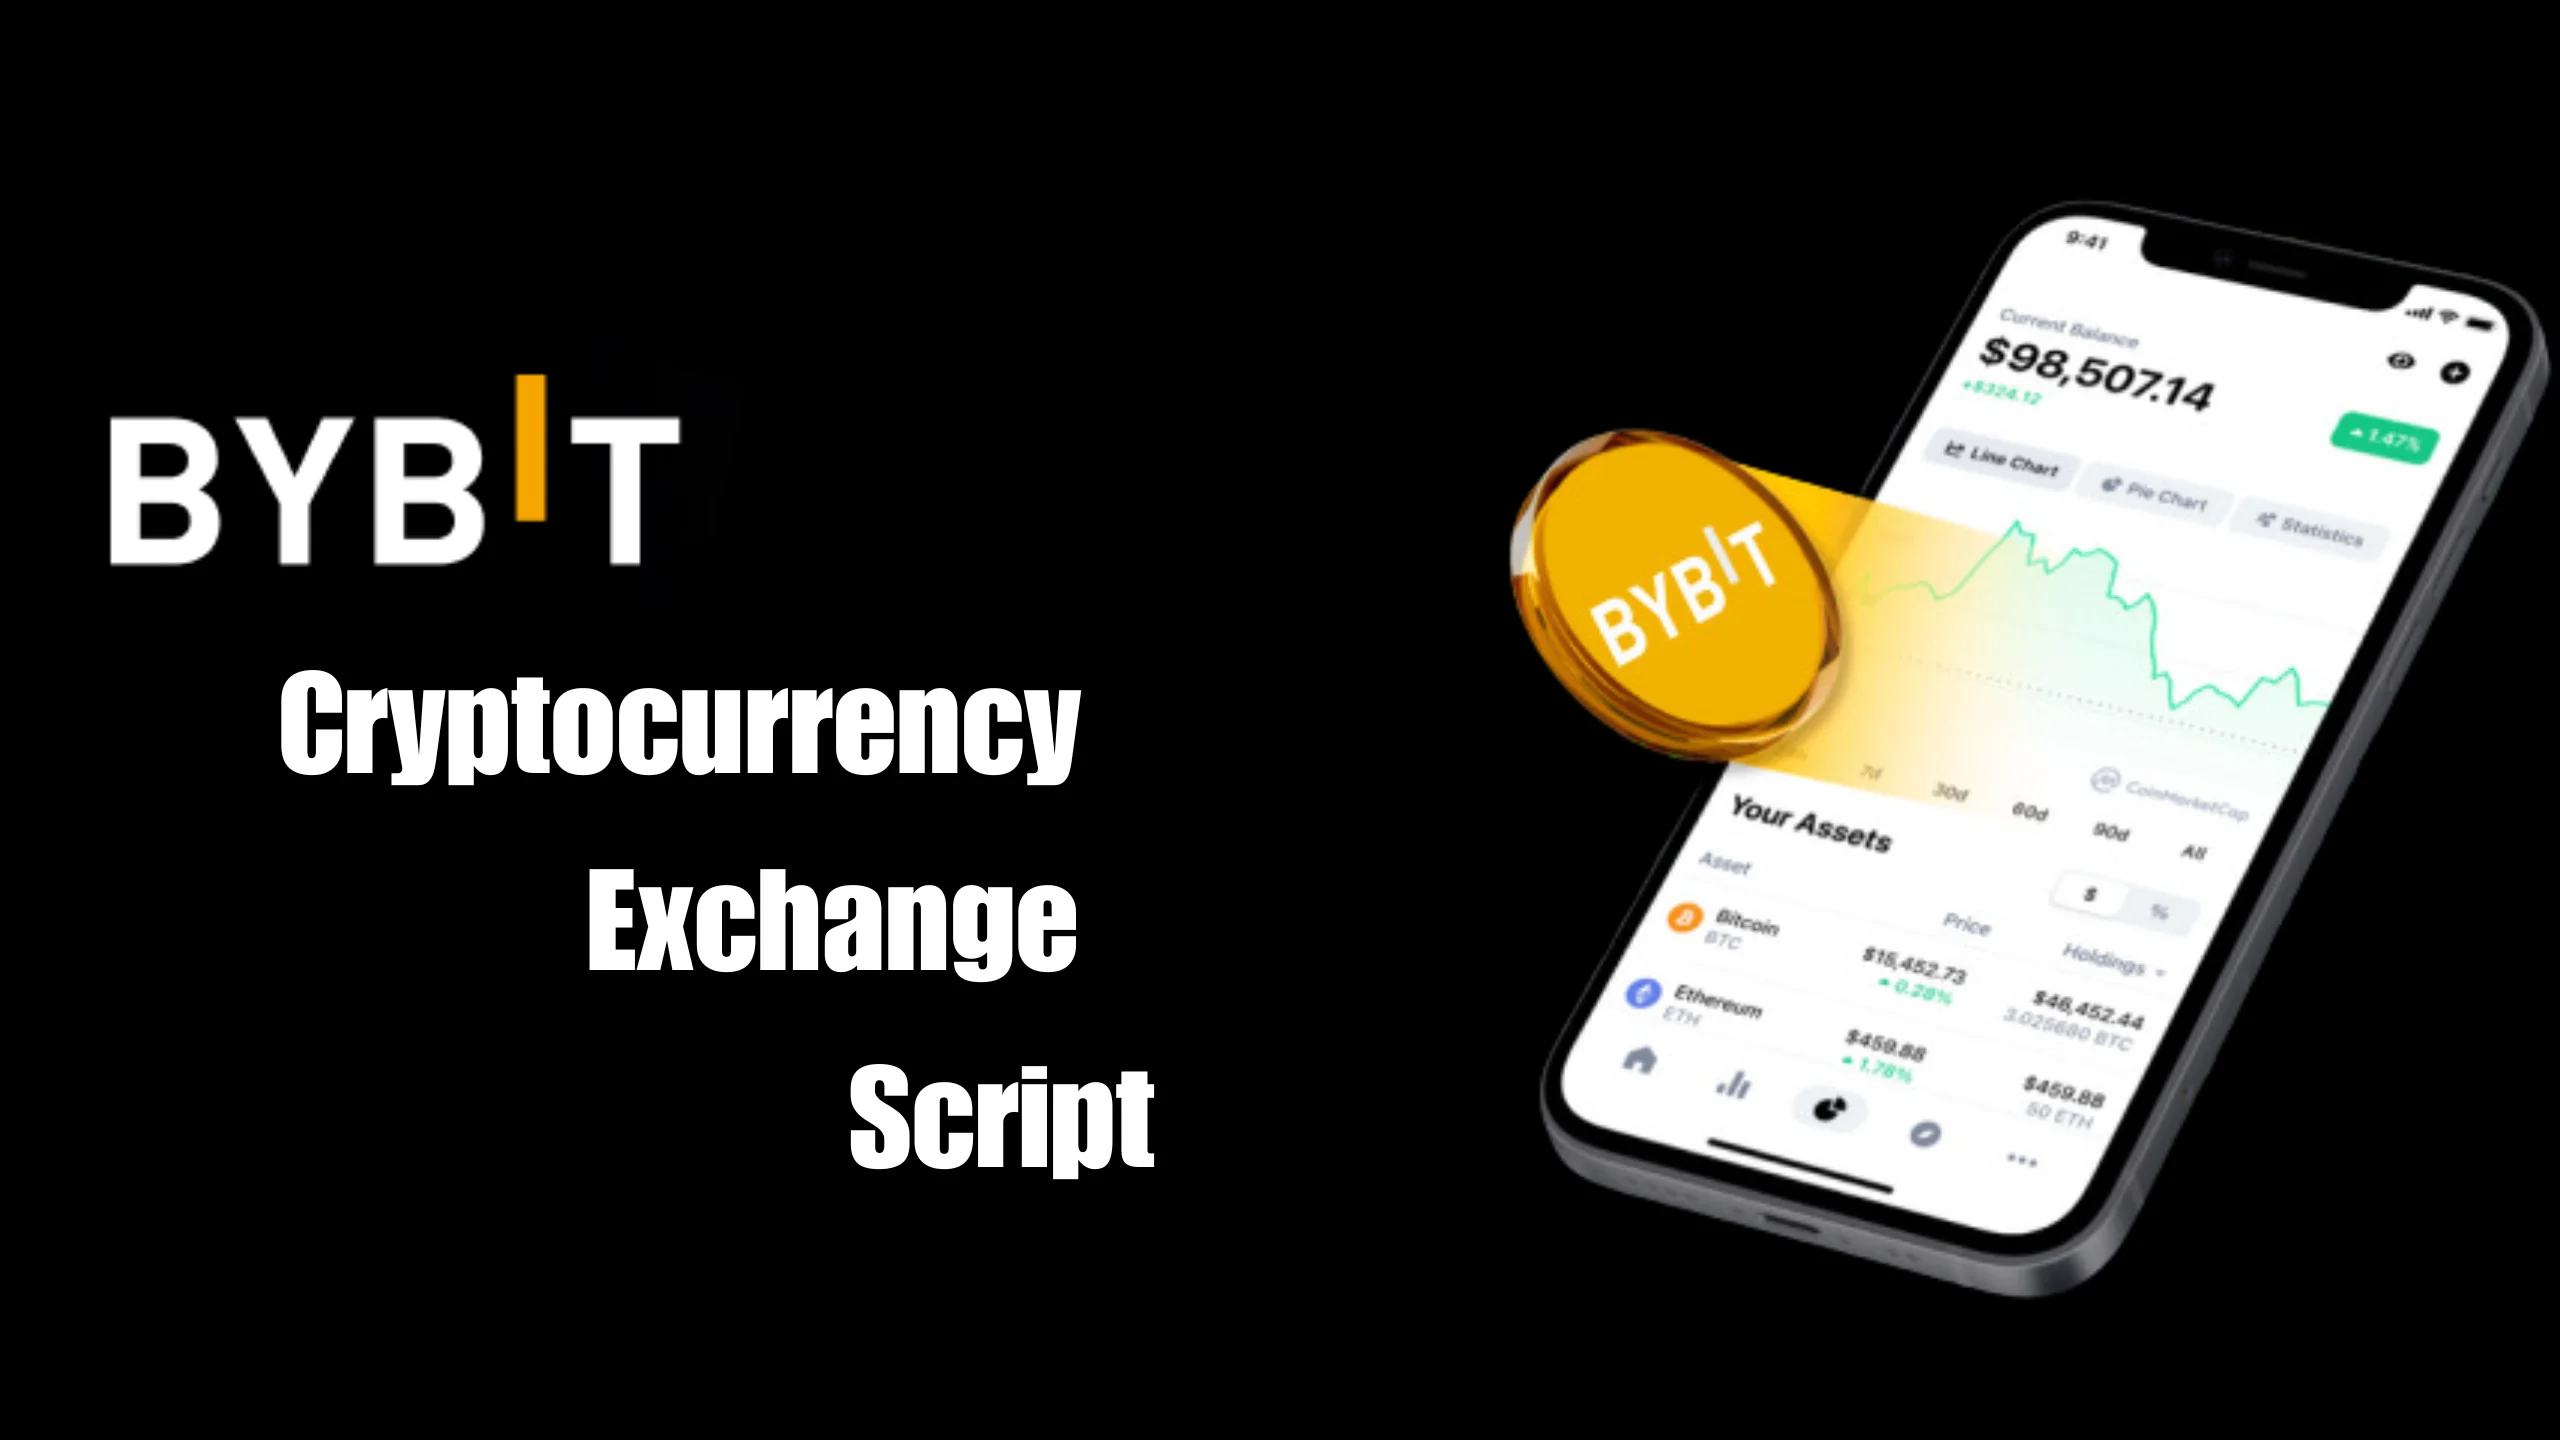 Explore the features of Bybit cryptocurrency exchange, highlighting security measures and advanced trading tools.